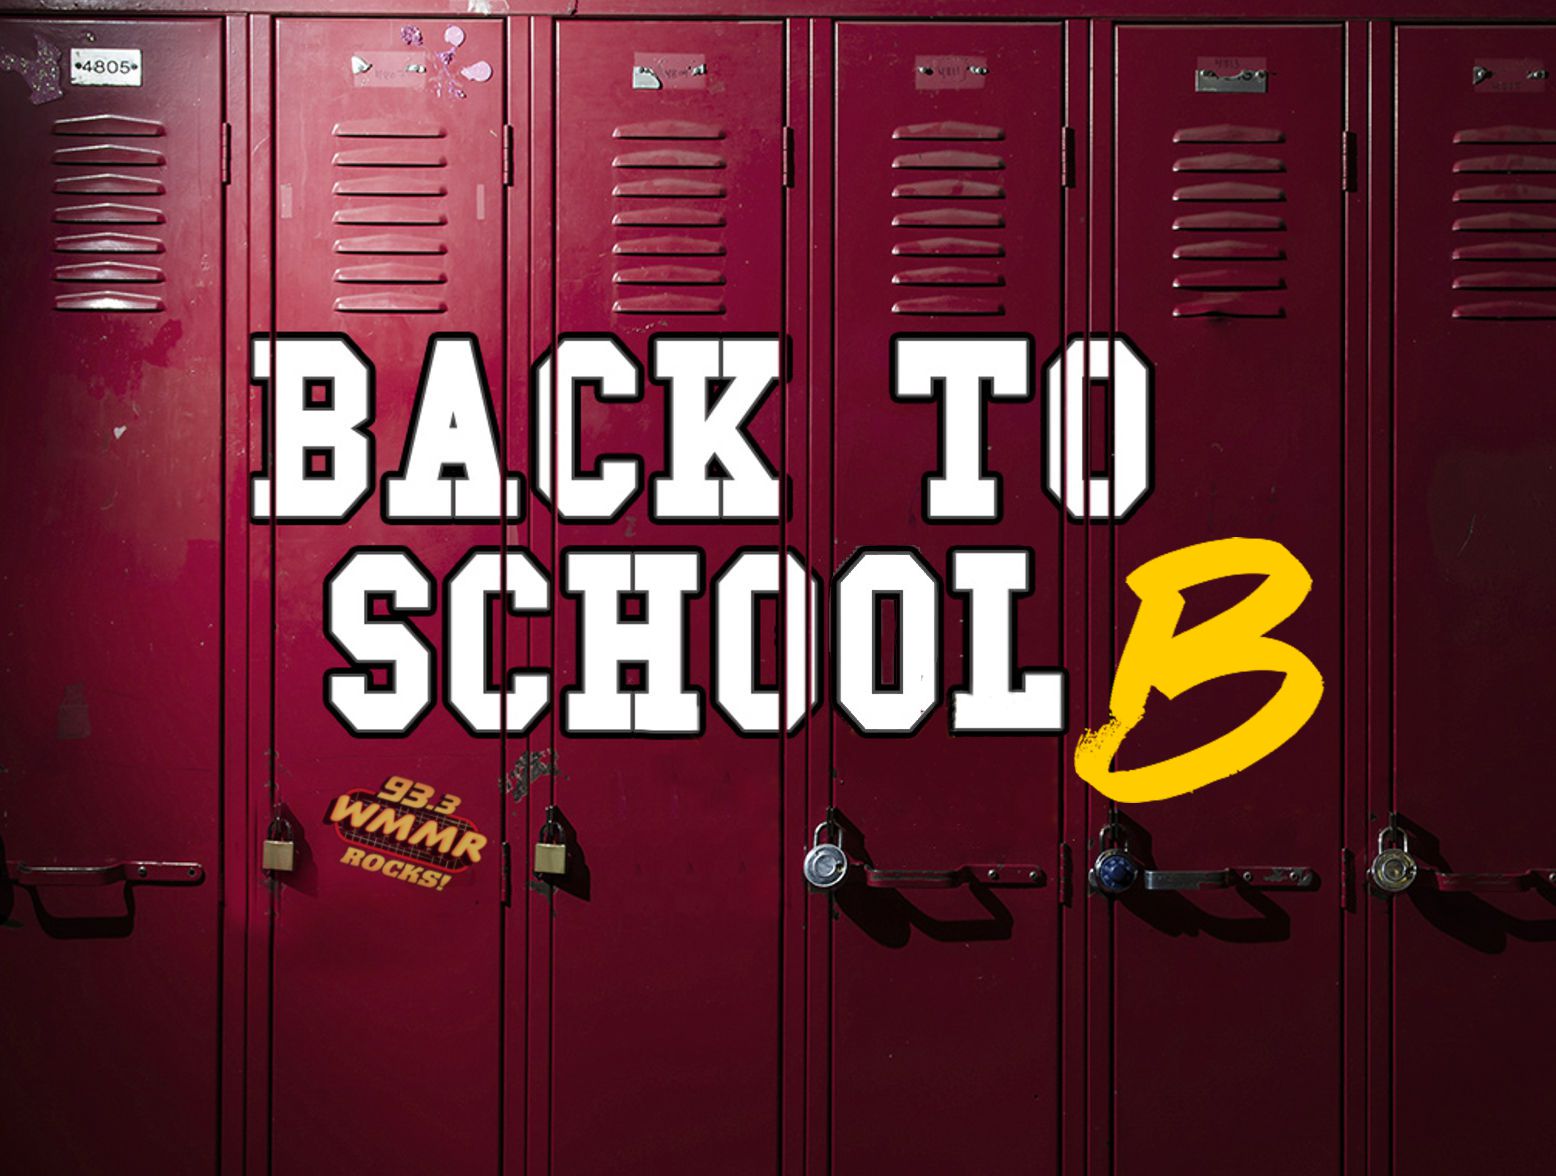 A-Z B songs promotional graphic on a backgournd of red school lockers